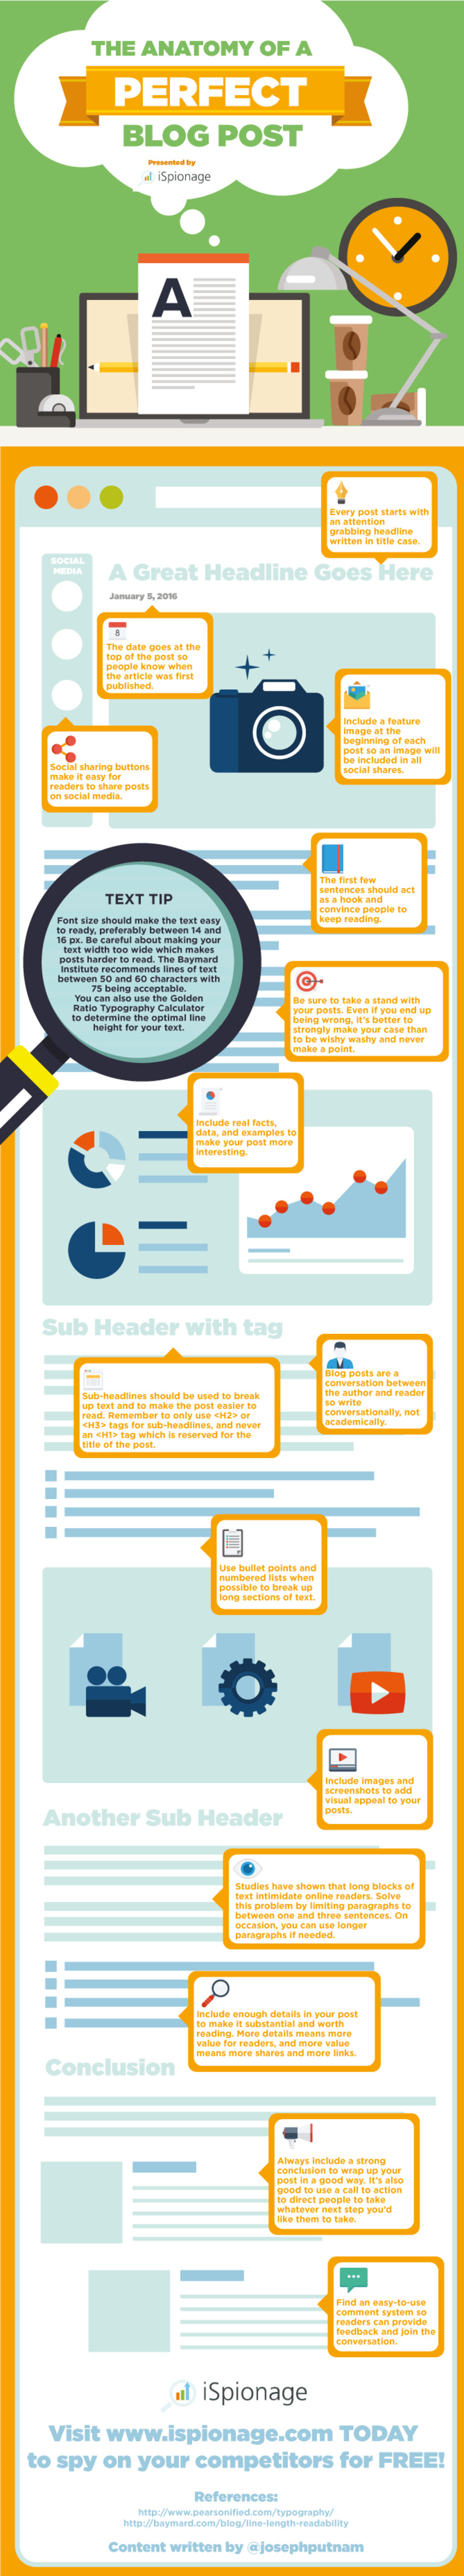 The Anatomy of a Perfect Blog Post [Infographic] - HubSpot | The MarTech Digest | Scoop.it